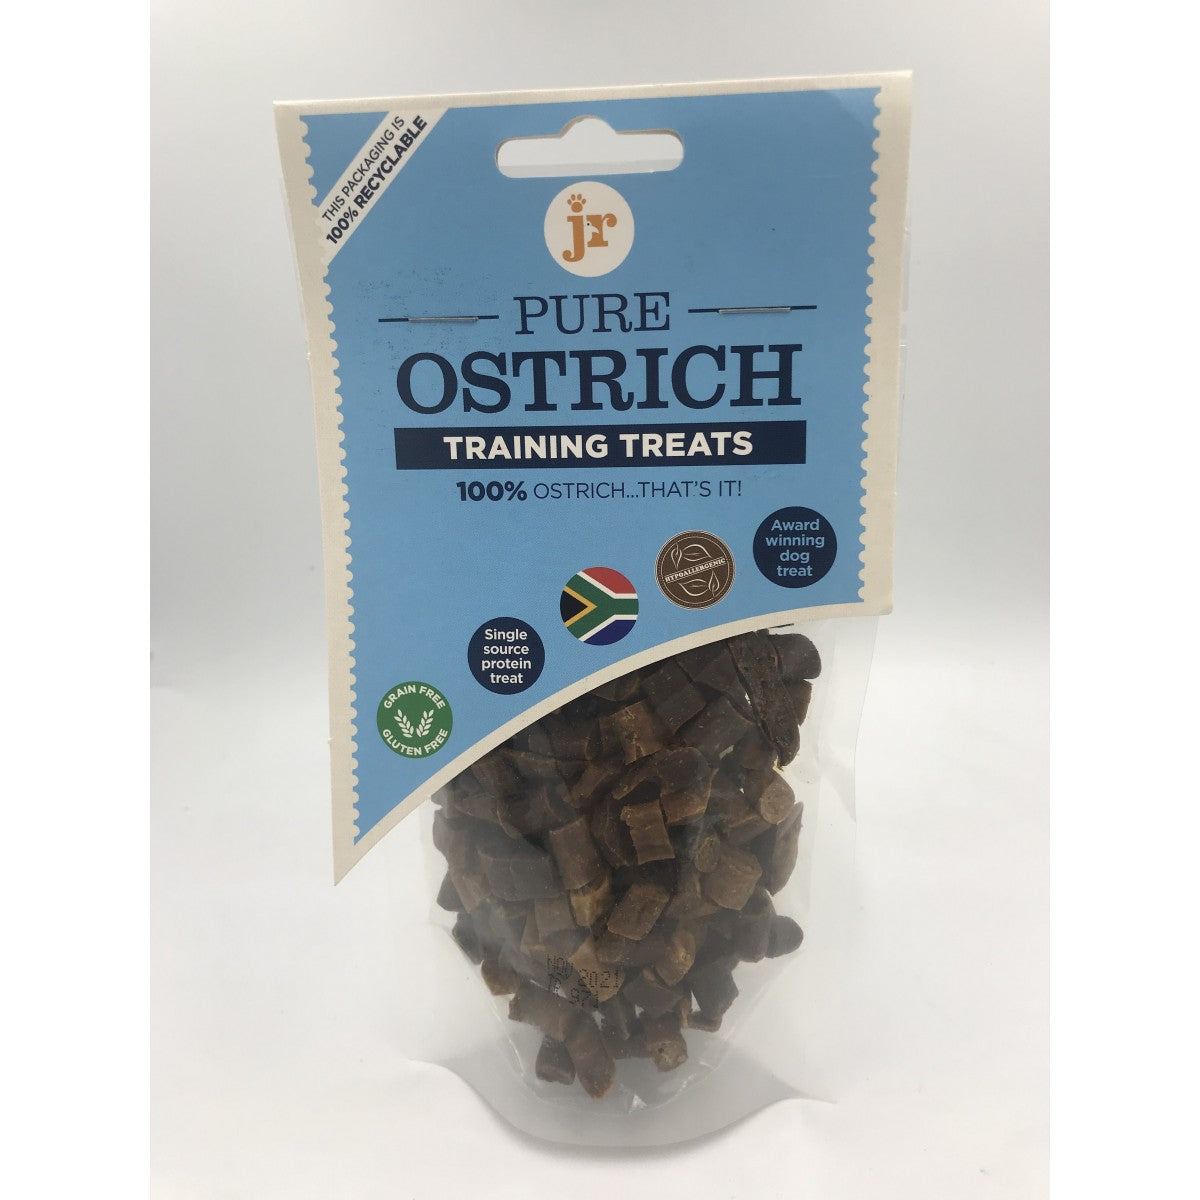 JR - The Absolute Ultimate Pure Range Ostrich Training Treats 85g